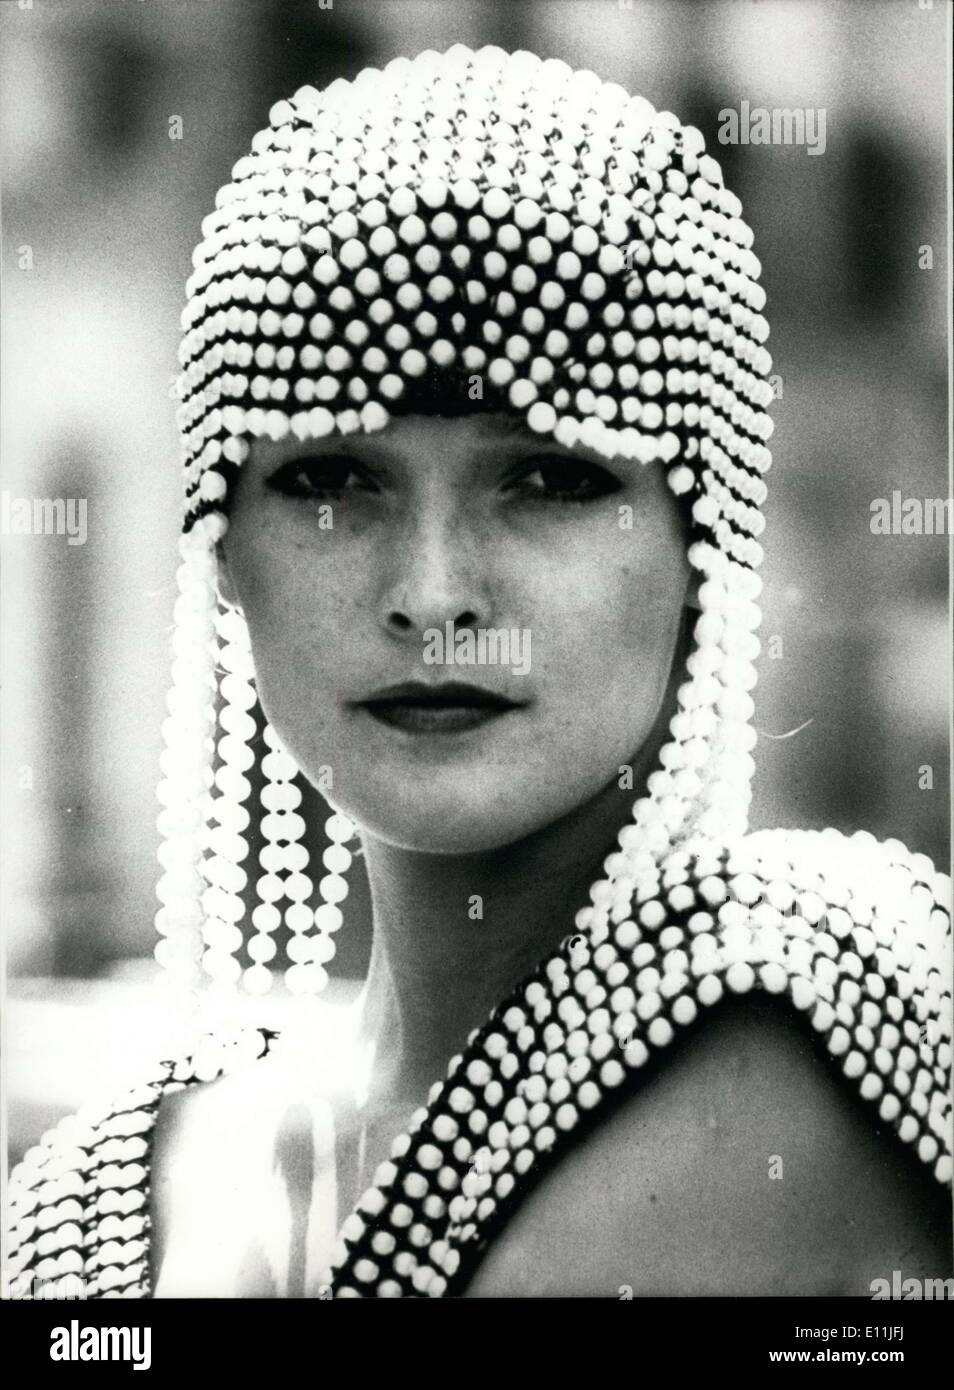 Aug. 02, 1978 - This ravishing headdress made of pearls crocheted together is a new creation by Parisian clothing designer Paco Stock Photo